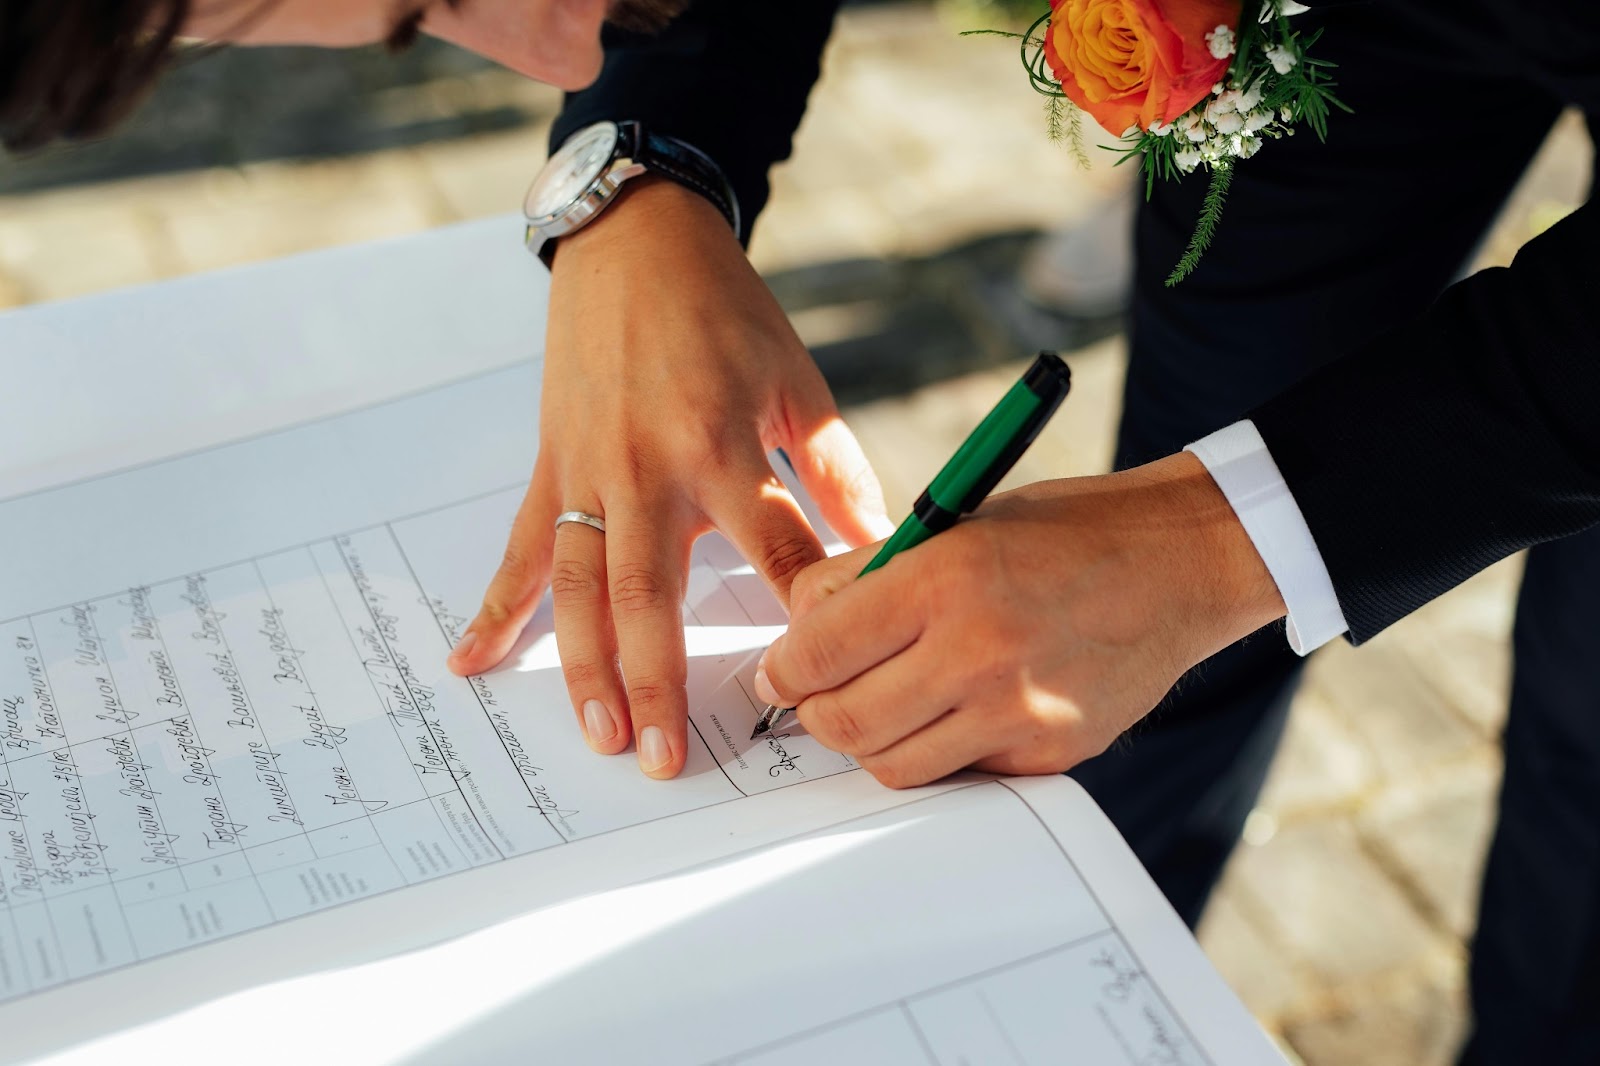 Legal documents and passports arranged neatly on a table for a destination wedding.